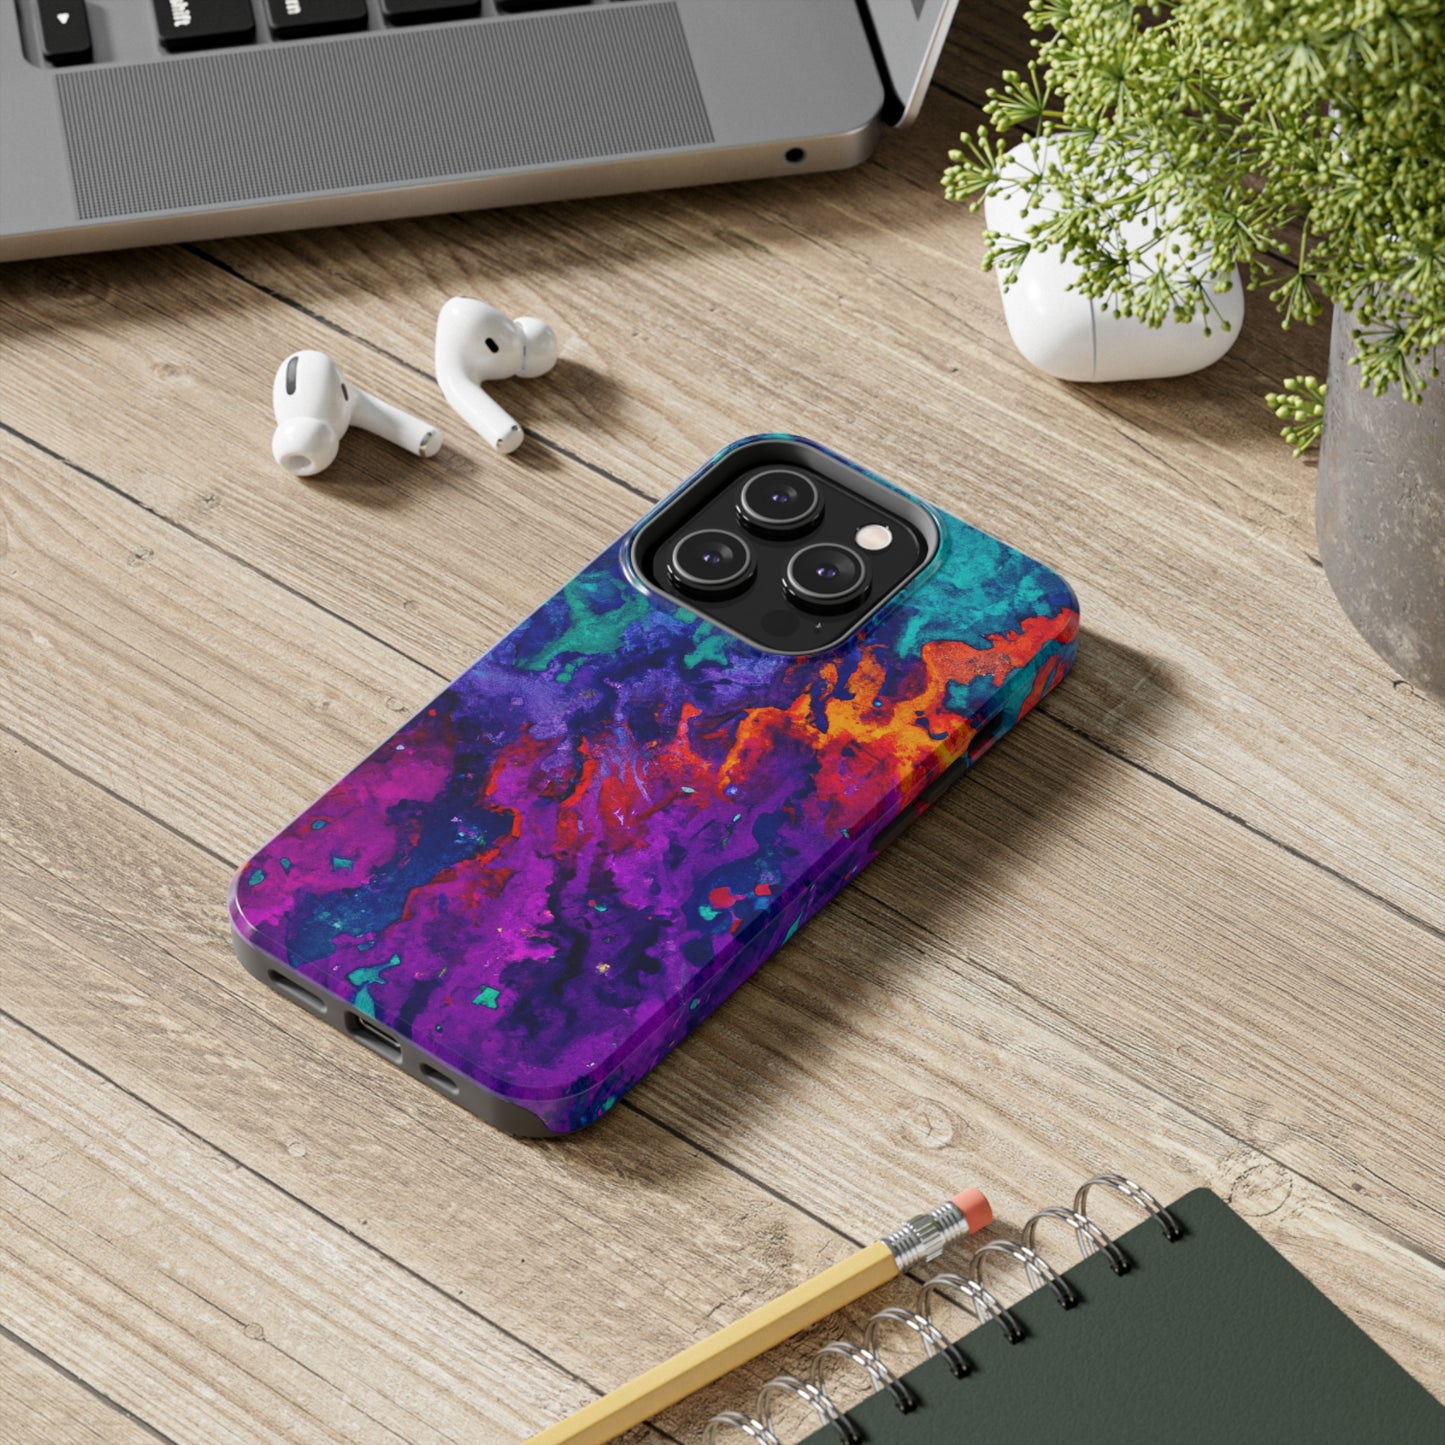 Tough Case-Mate iPhone Case Ft. Ice Flame